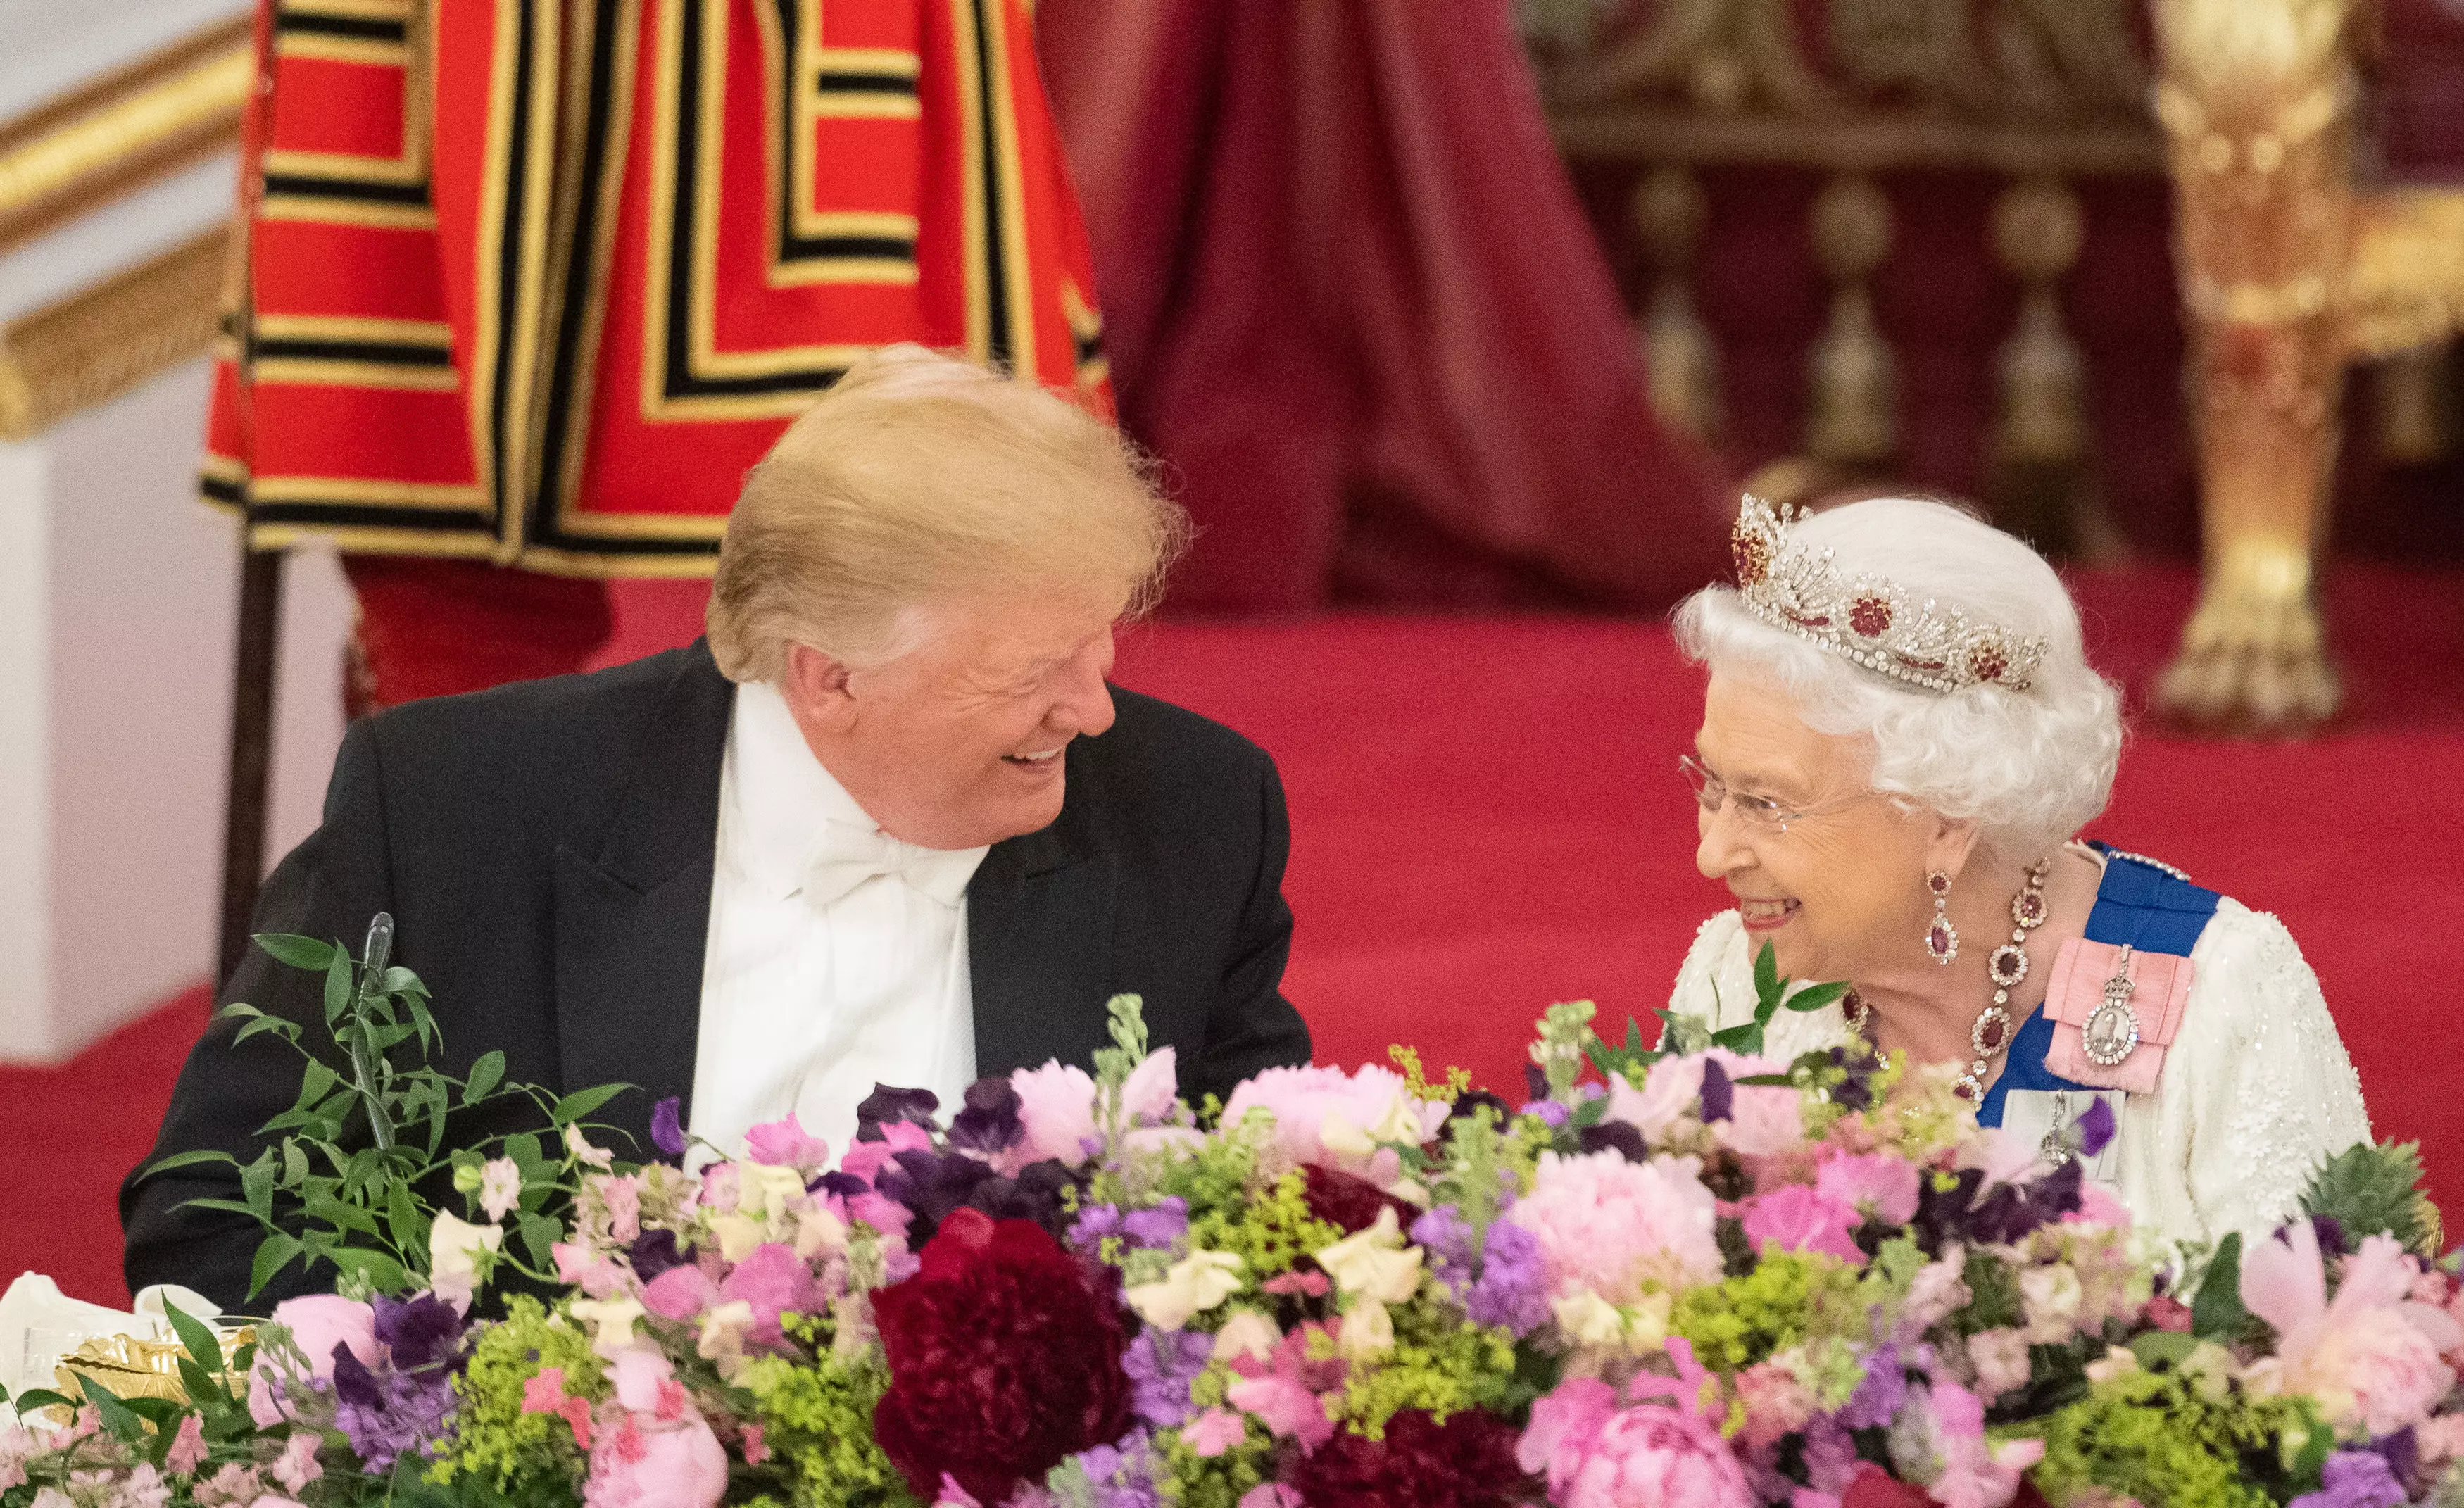 The Queen and Trump shared a chuckle during the banquet.